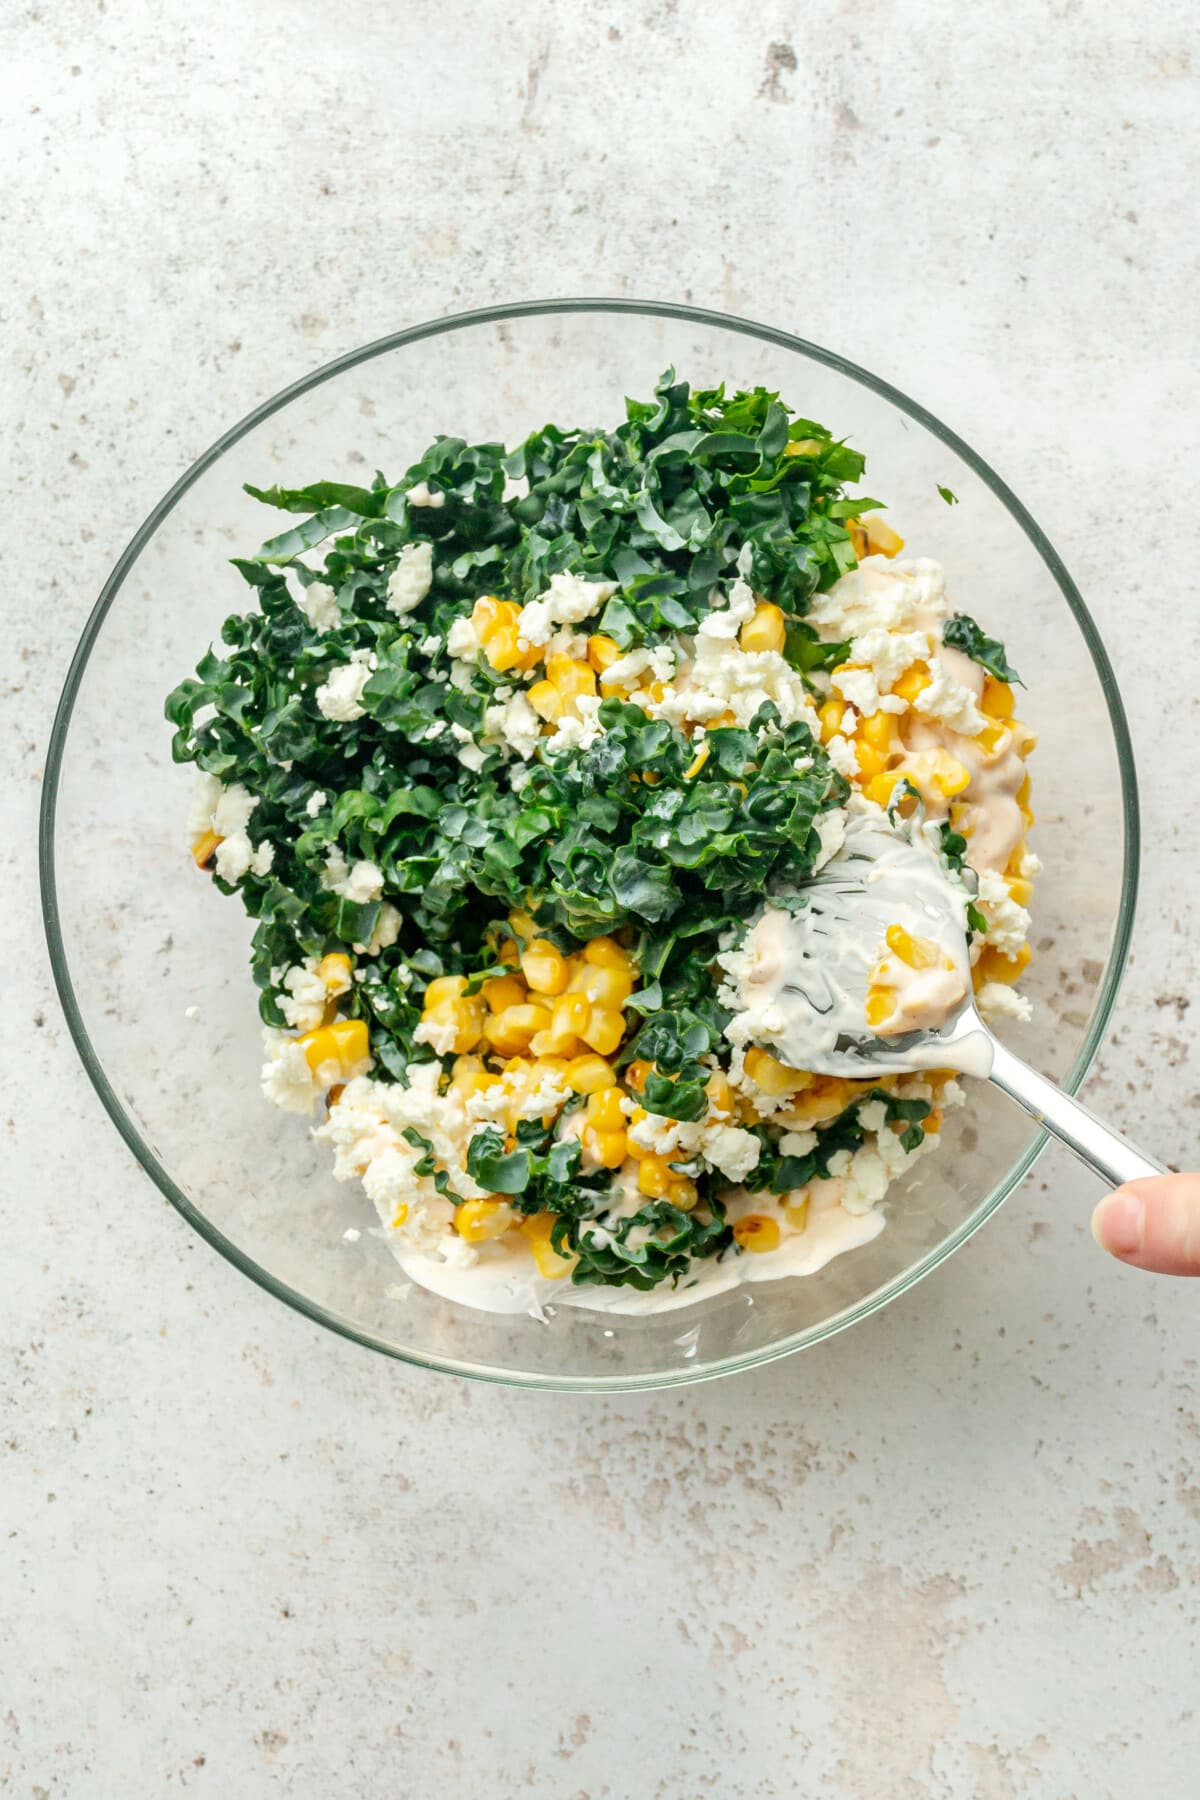 Mexican street corn and kale slaw is tossed with a mayo dressing in a bowl on a light grey surface.